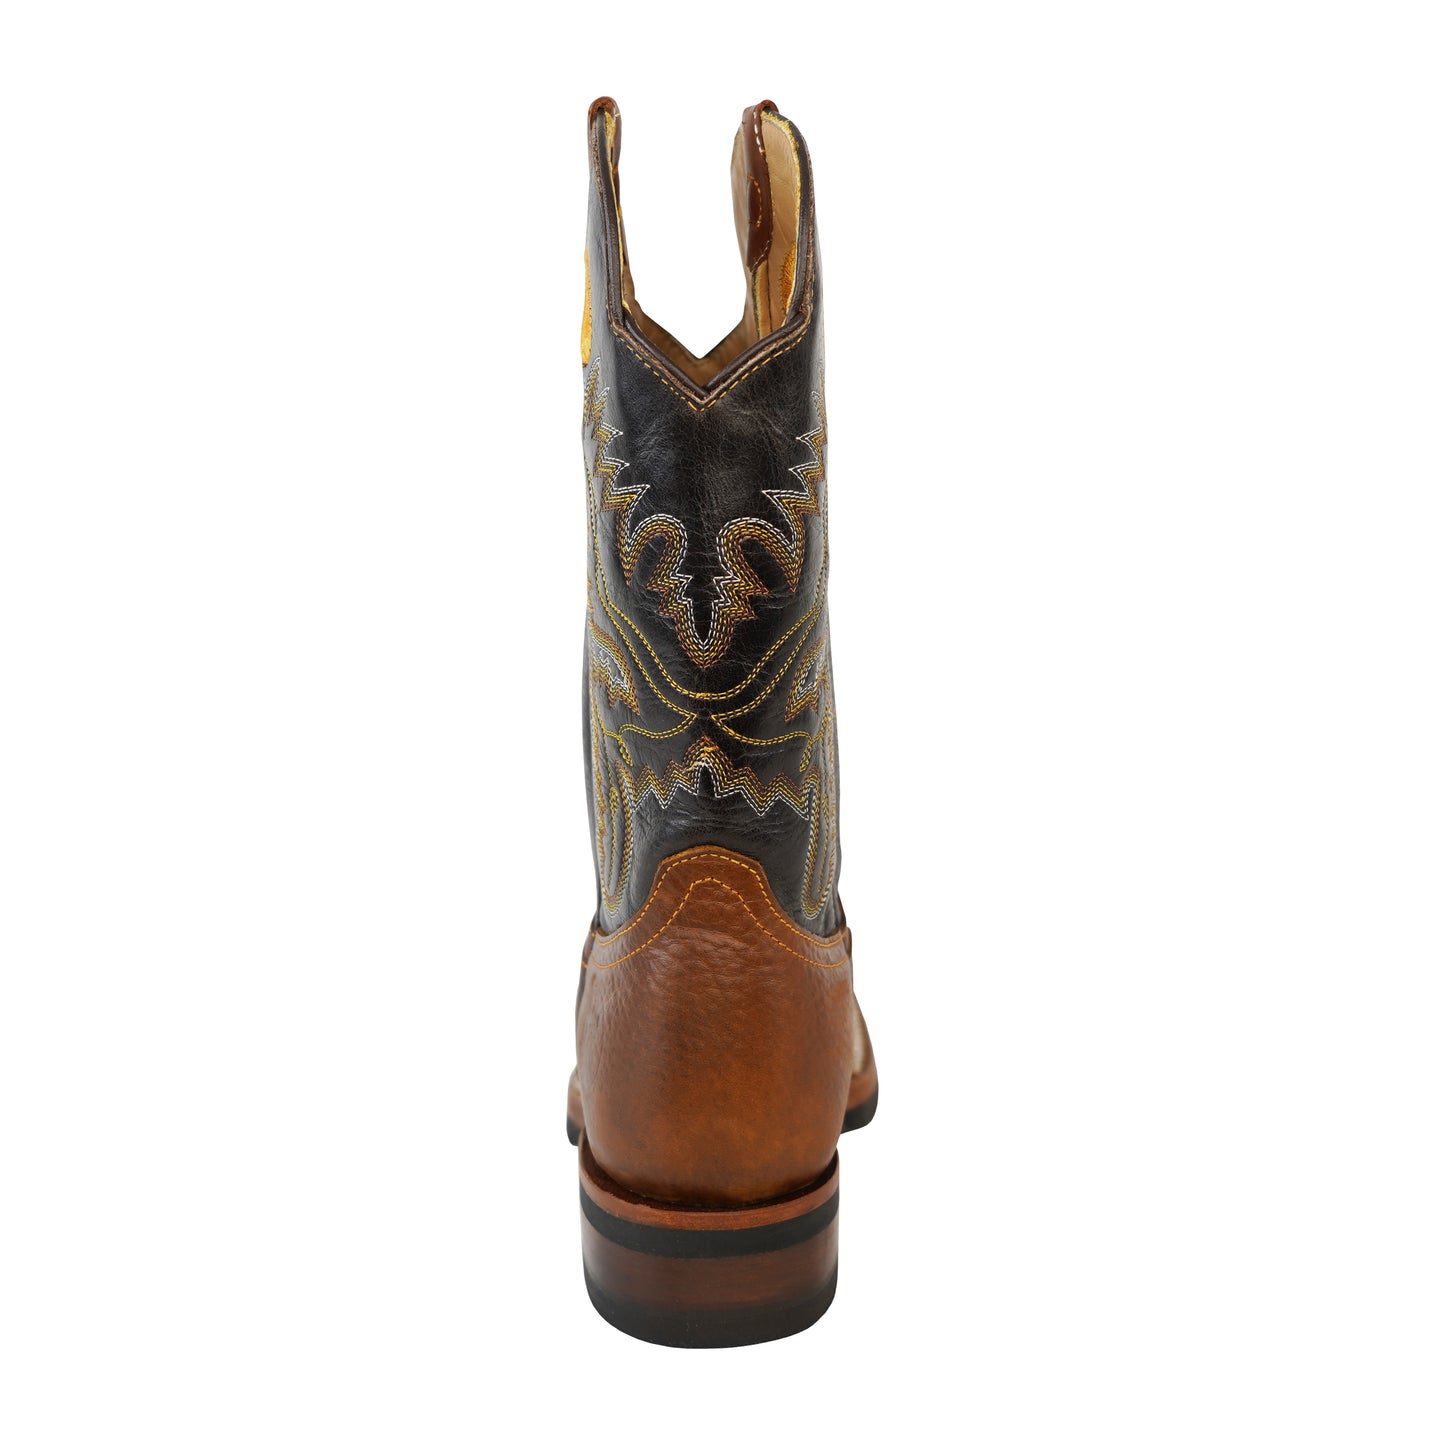 Roble Rodeo Style Boot